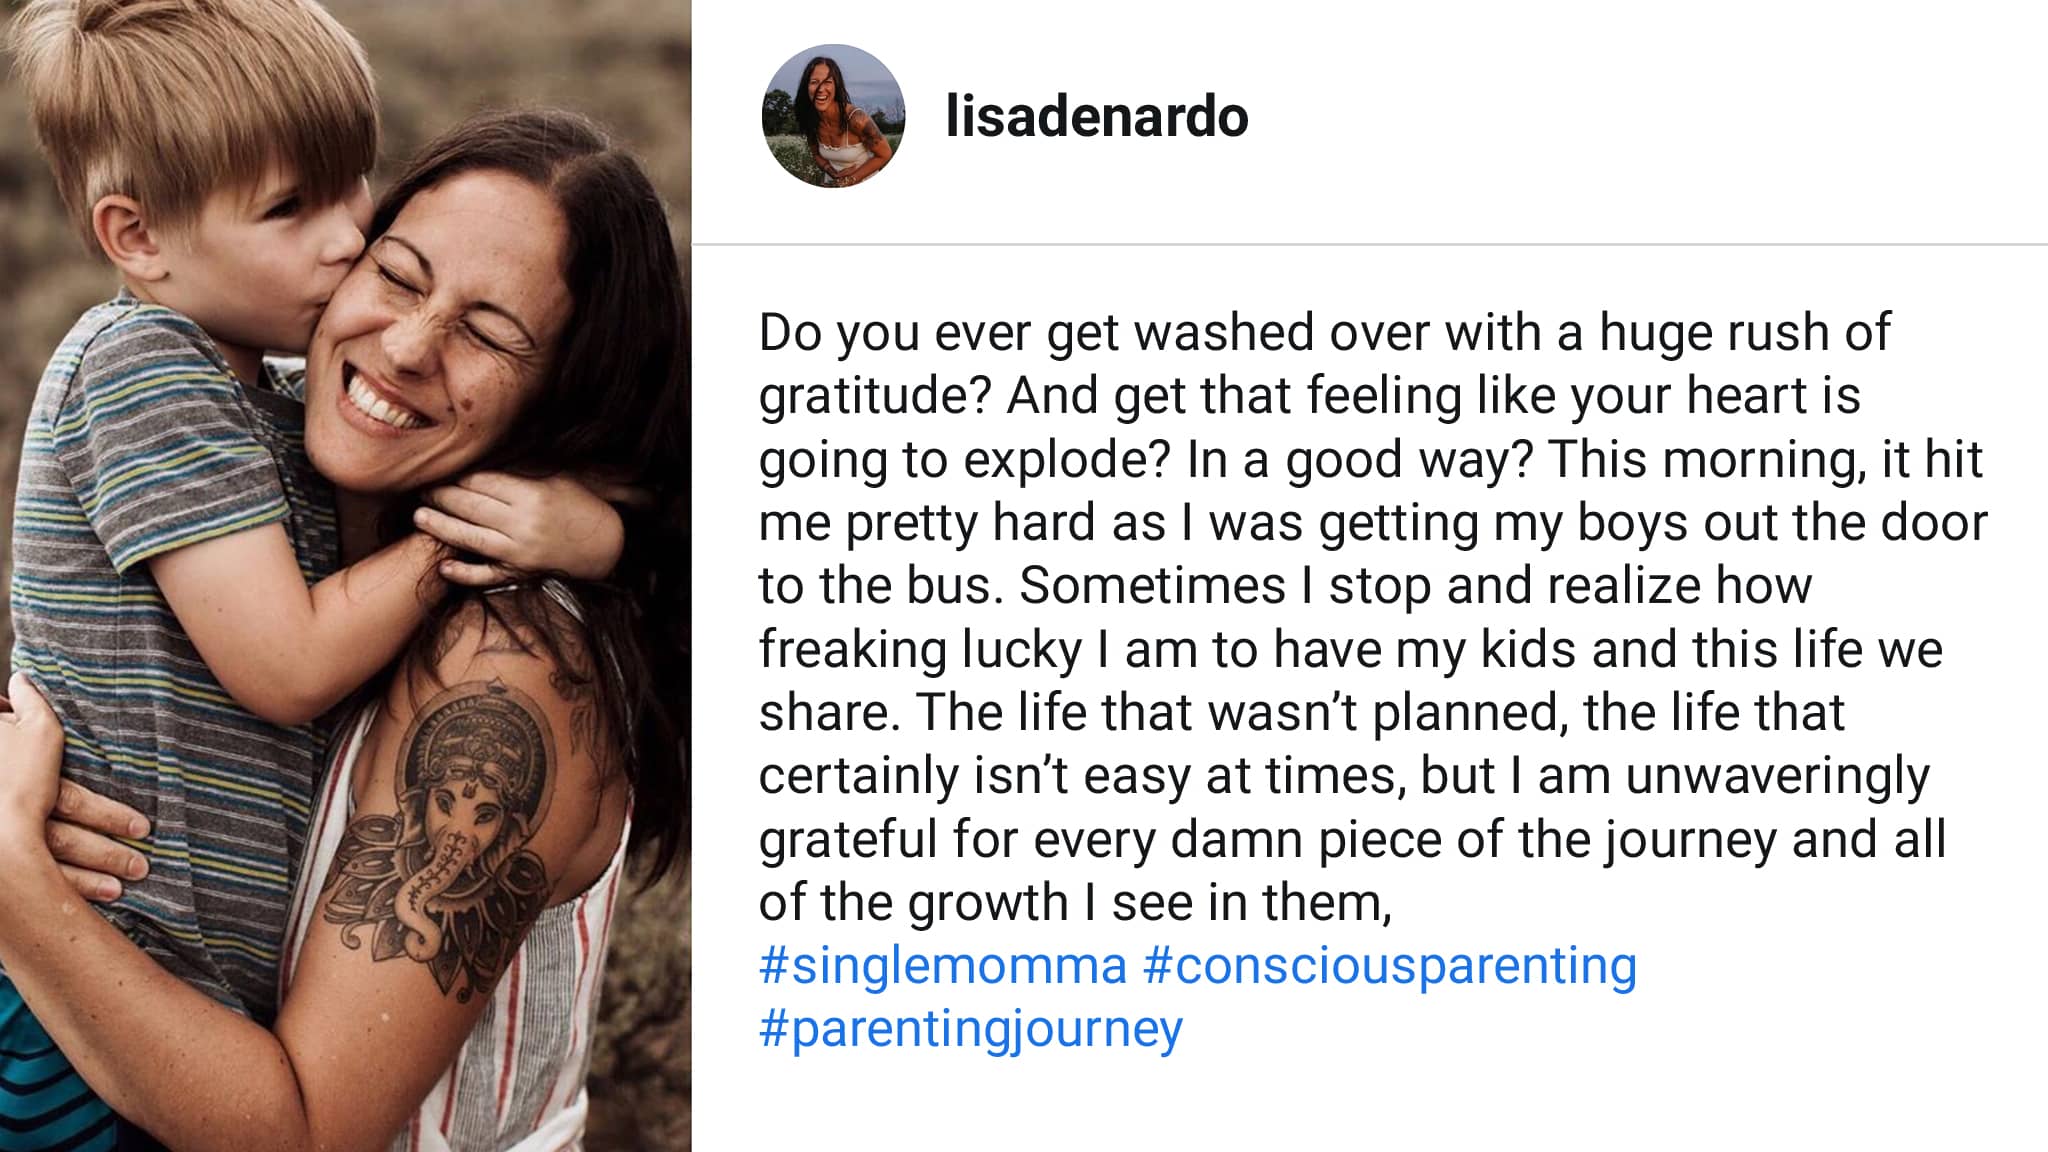 Instagram Post Of A Mother Happily Embracing Her Son With An Explanation Of How Grateful She Feels To Be A Mother Even In The Difficult Times